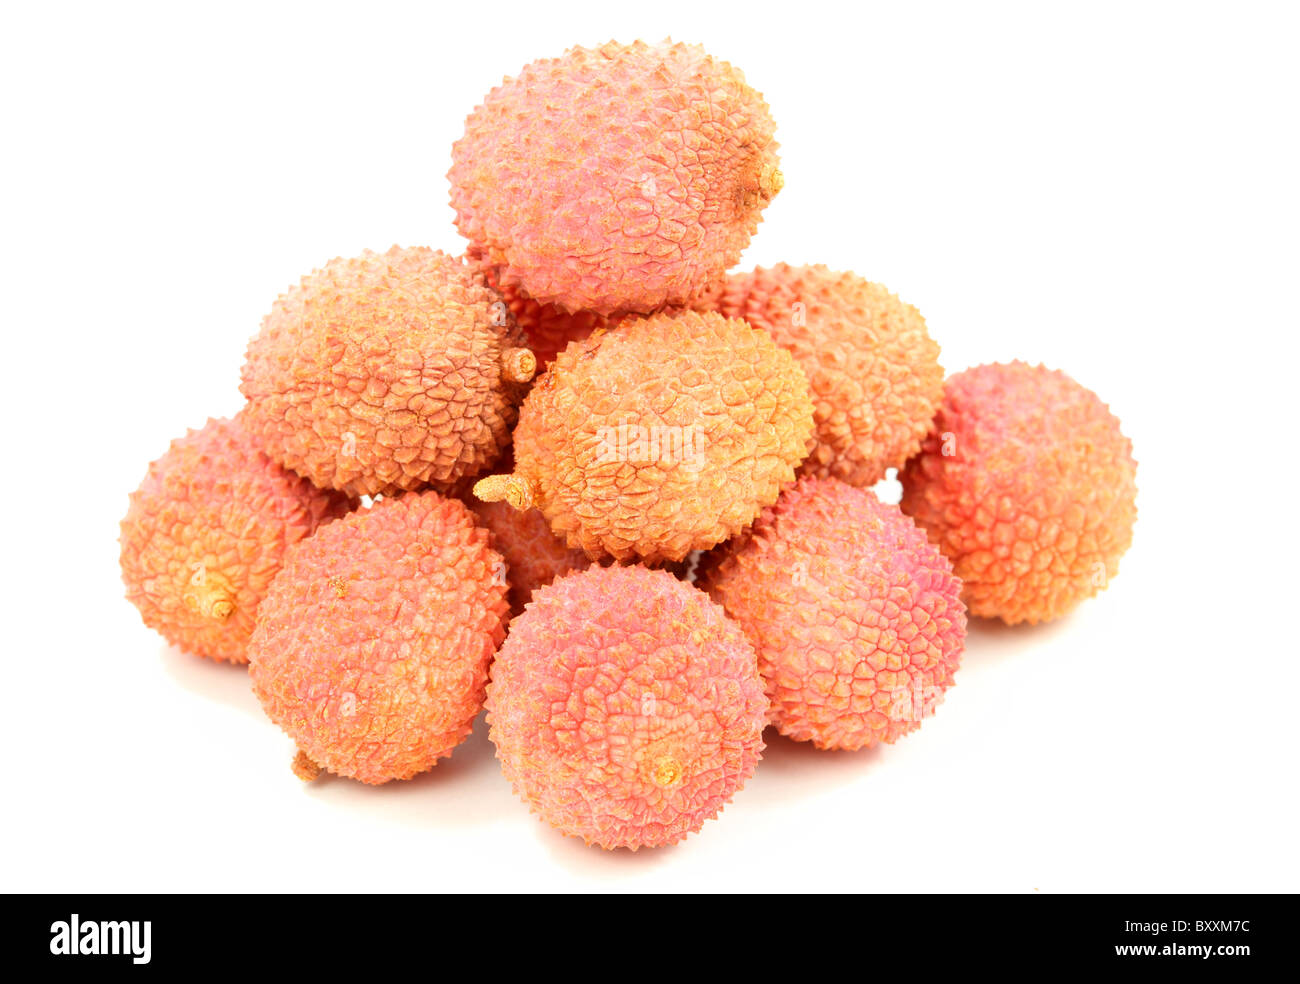 Litchis isolated over white background Stock Photo